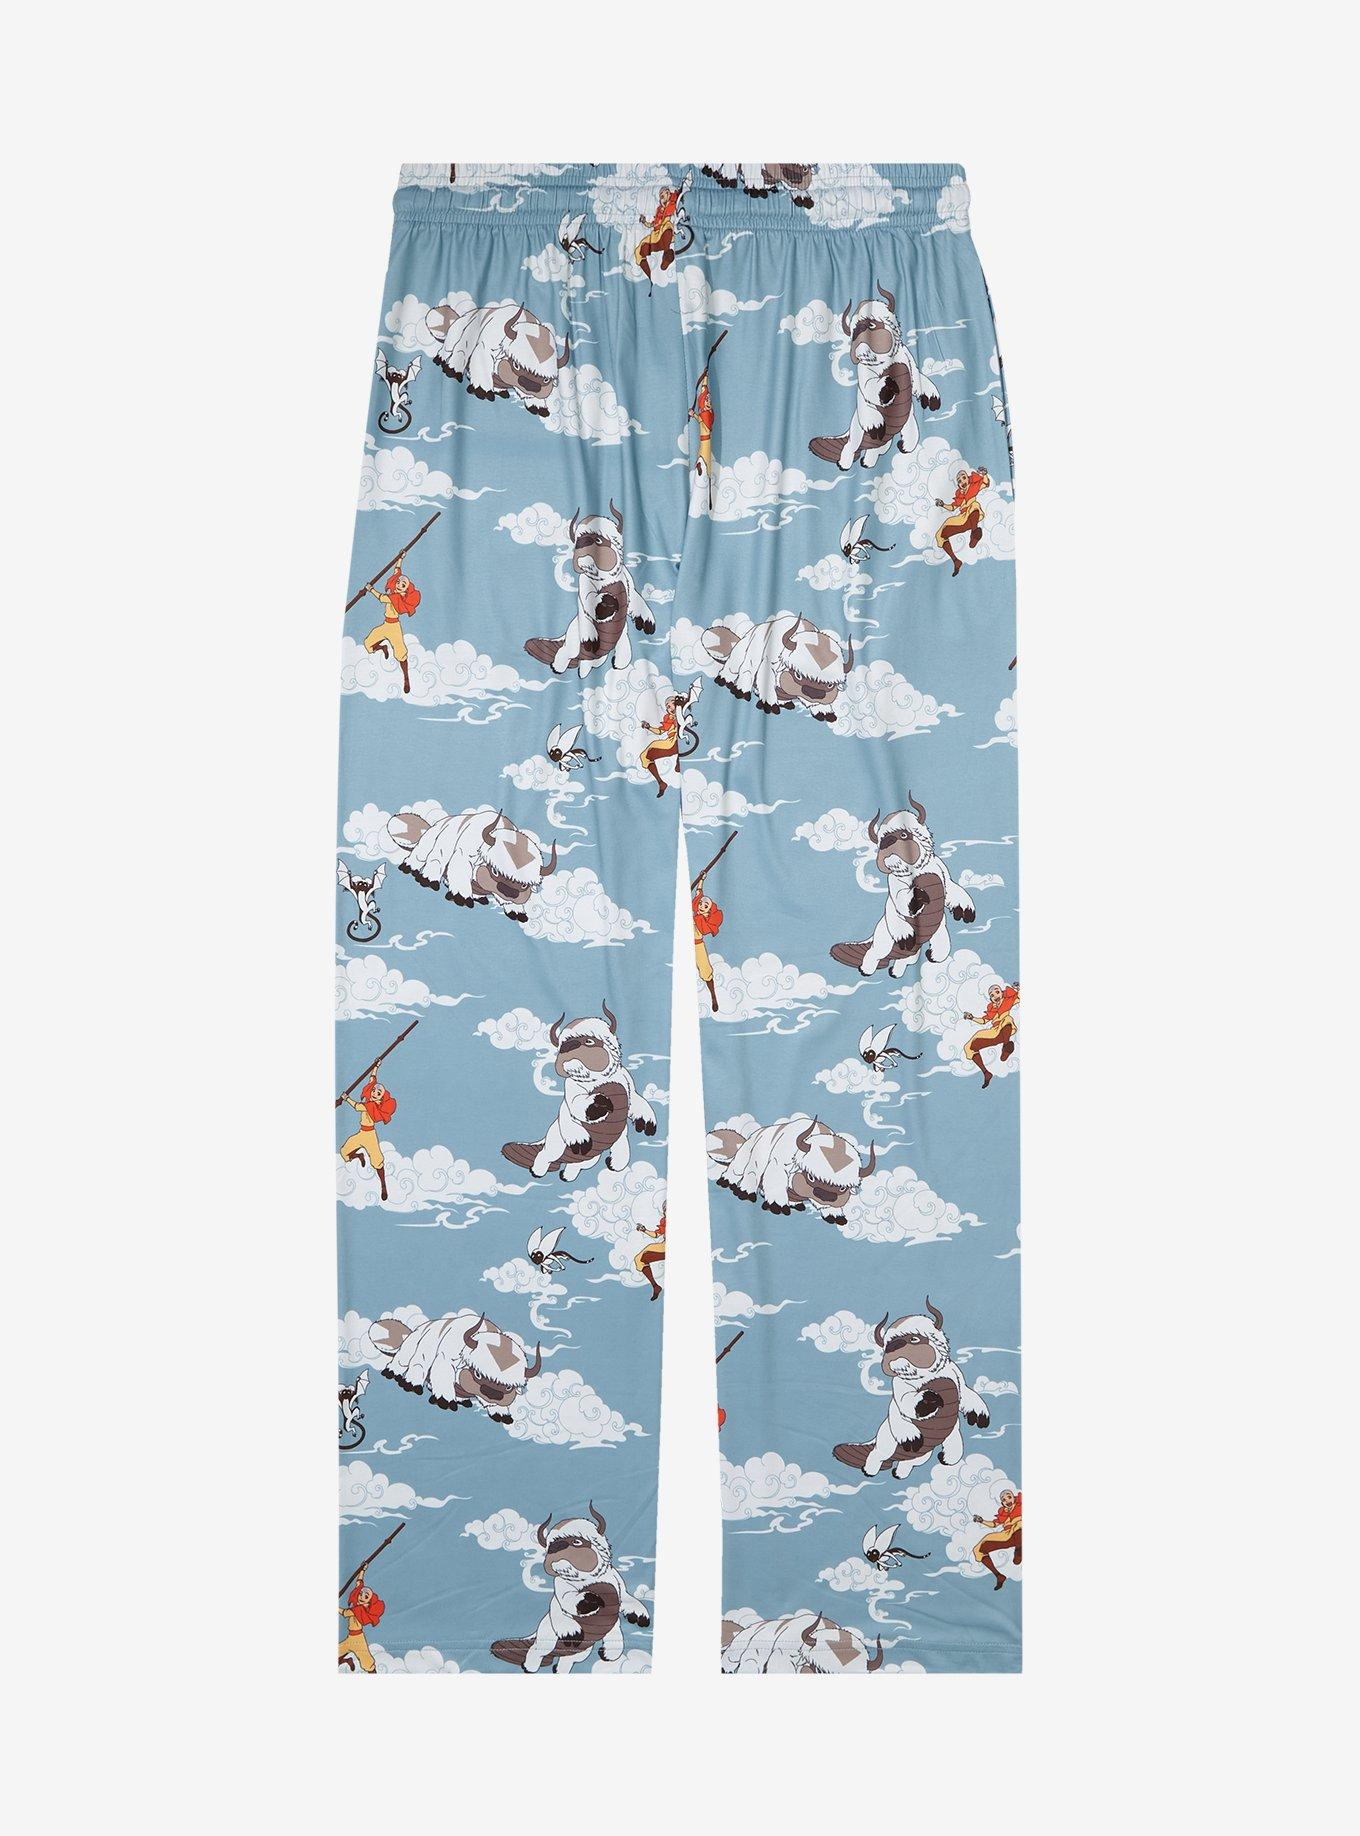 Avatar: The Last Airbender Appa & Aang Allover Print Sleep Pants - BoxLunch Exclusive, LIGHT BLUE, alternate